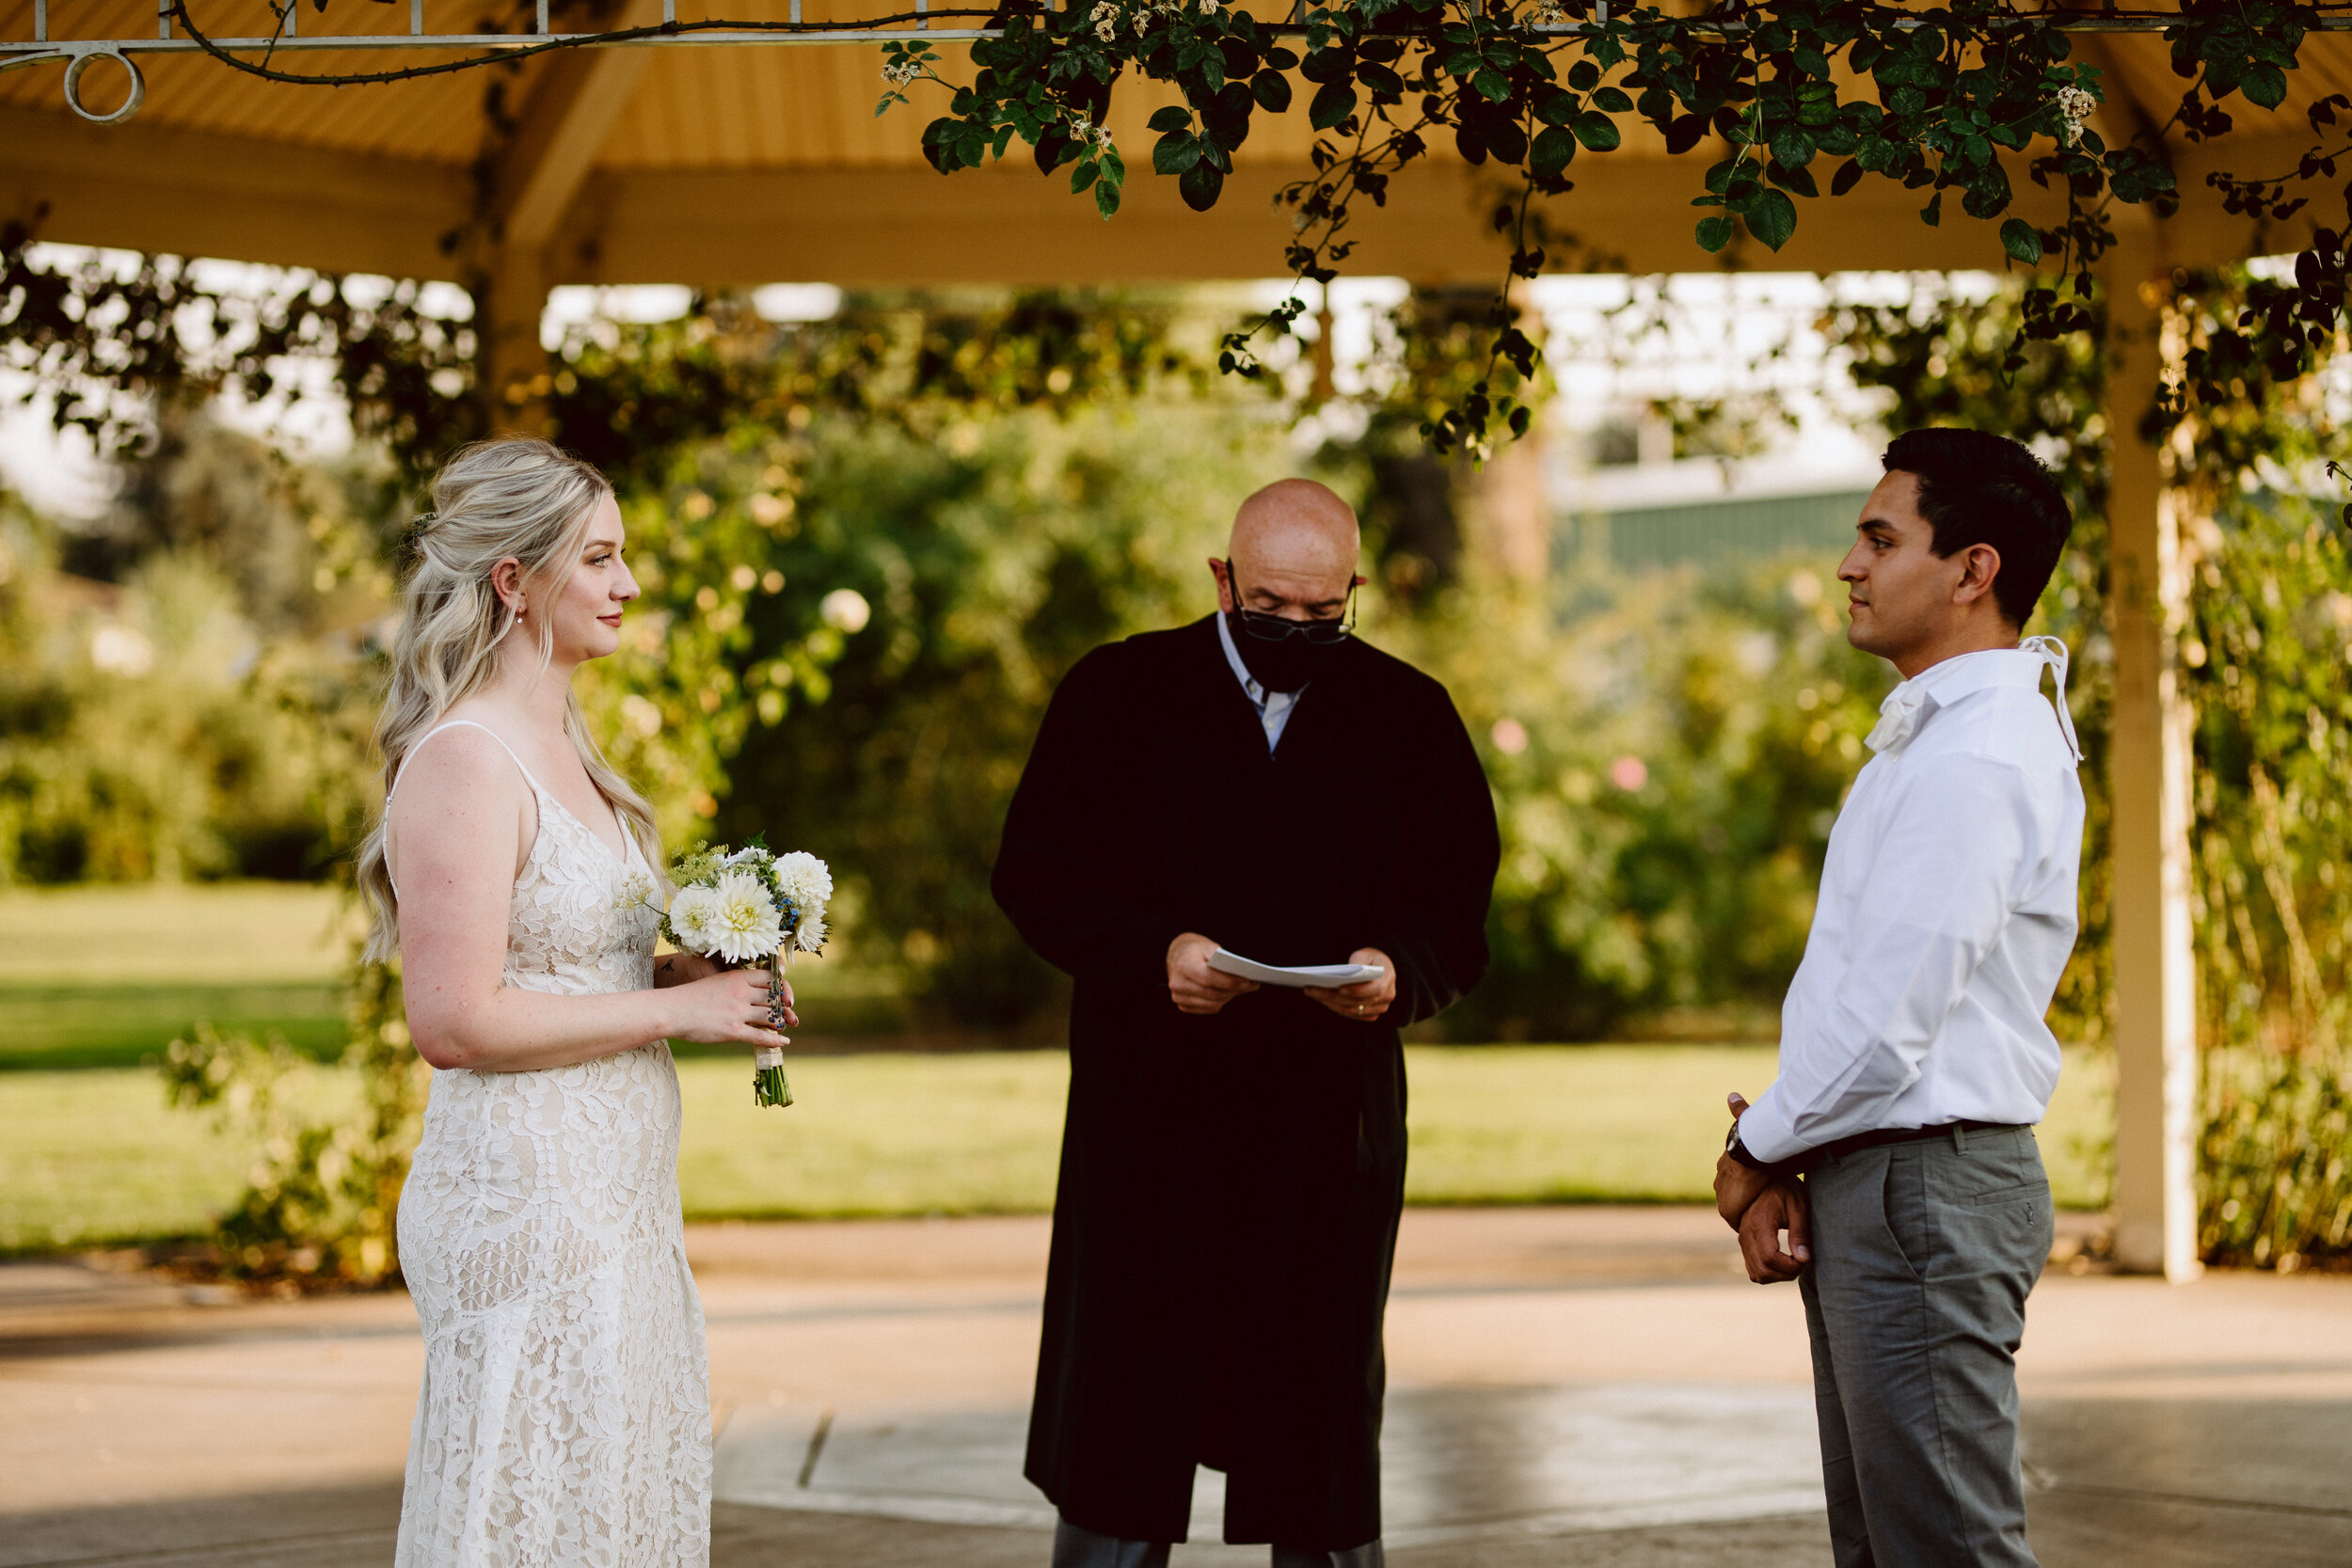 Bride and groom face each other during their elopement ceremony while an officiant reads from his notes under a gazebo at sunset in a garden